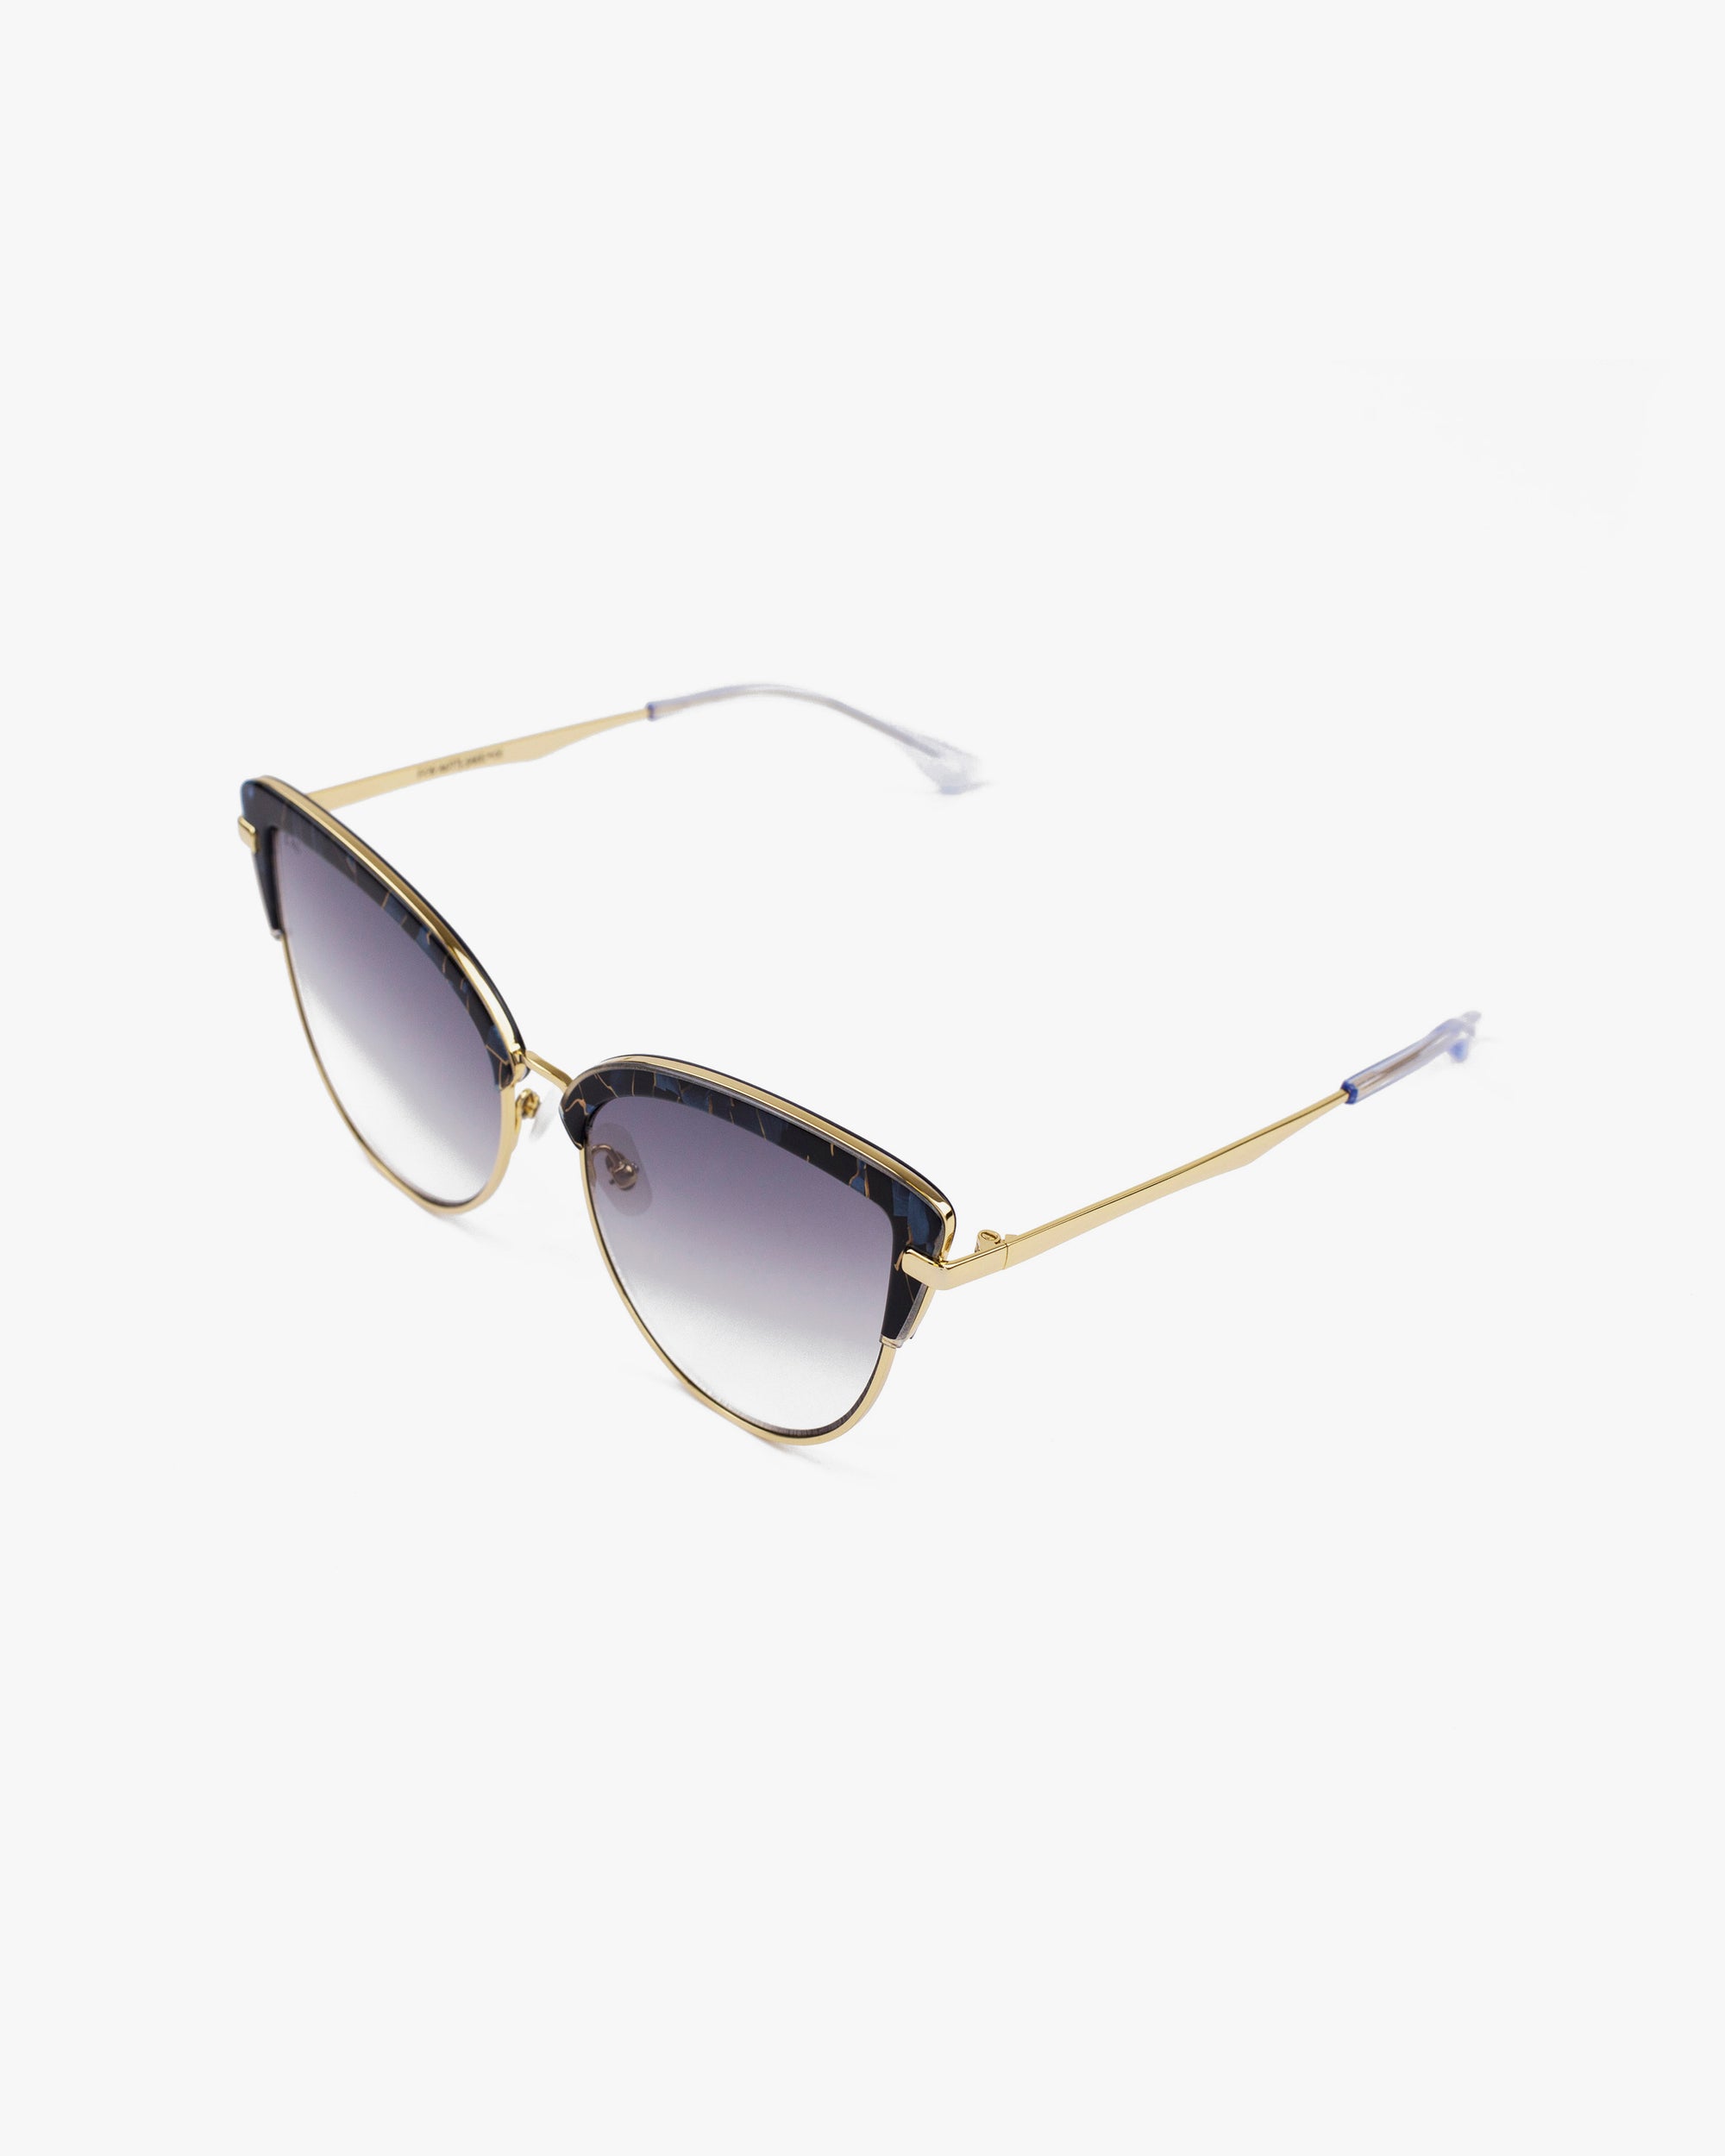 A pair of stylish For Art's Sake® Venus sunglasses with gradient dark nylon lenses and an 18-karat gold-plated frame. The top part of the frame is black, adding a touch of contrast. The arms are thin and also gold-colored, with black ear tips for comfort.